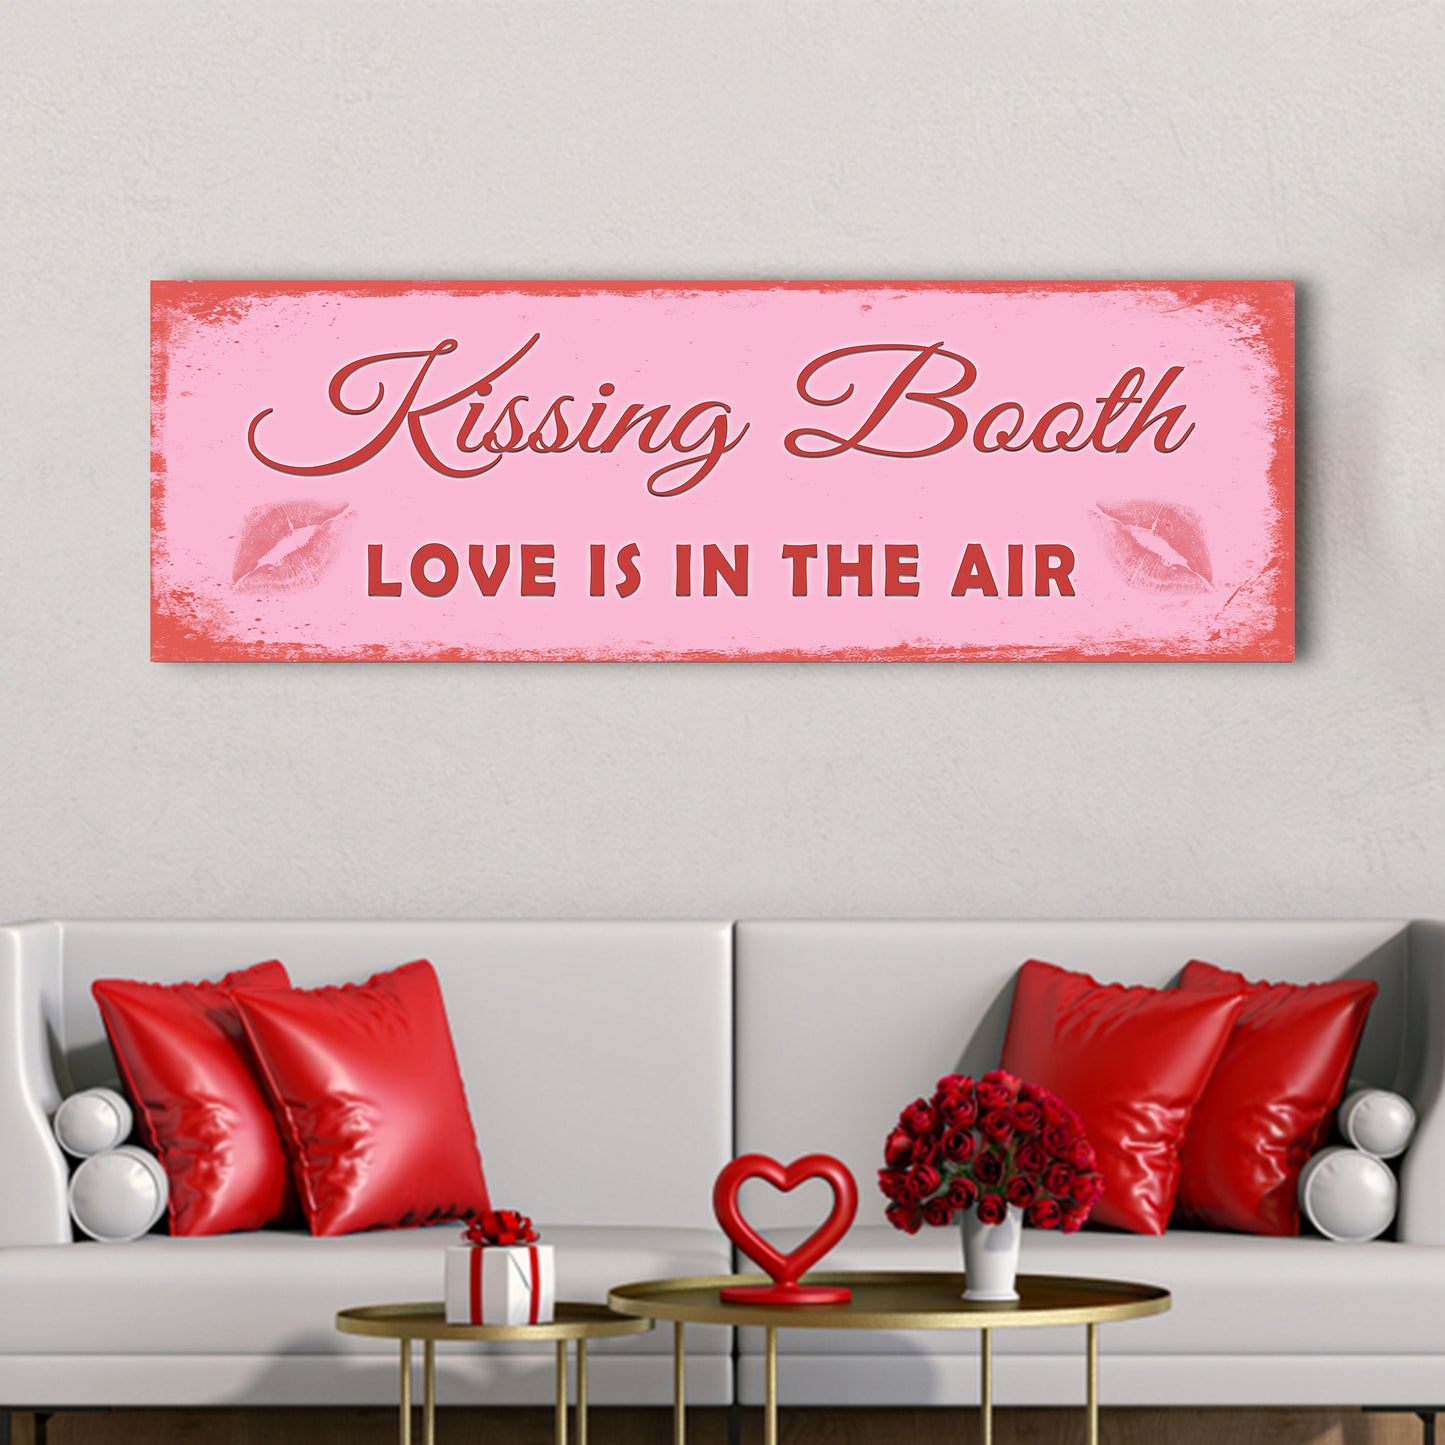 Kissing Booth "Love Is In The Air" Sign - Image by Tailored Canvases